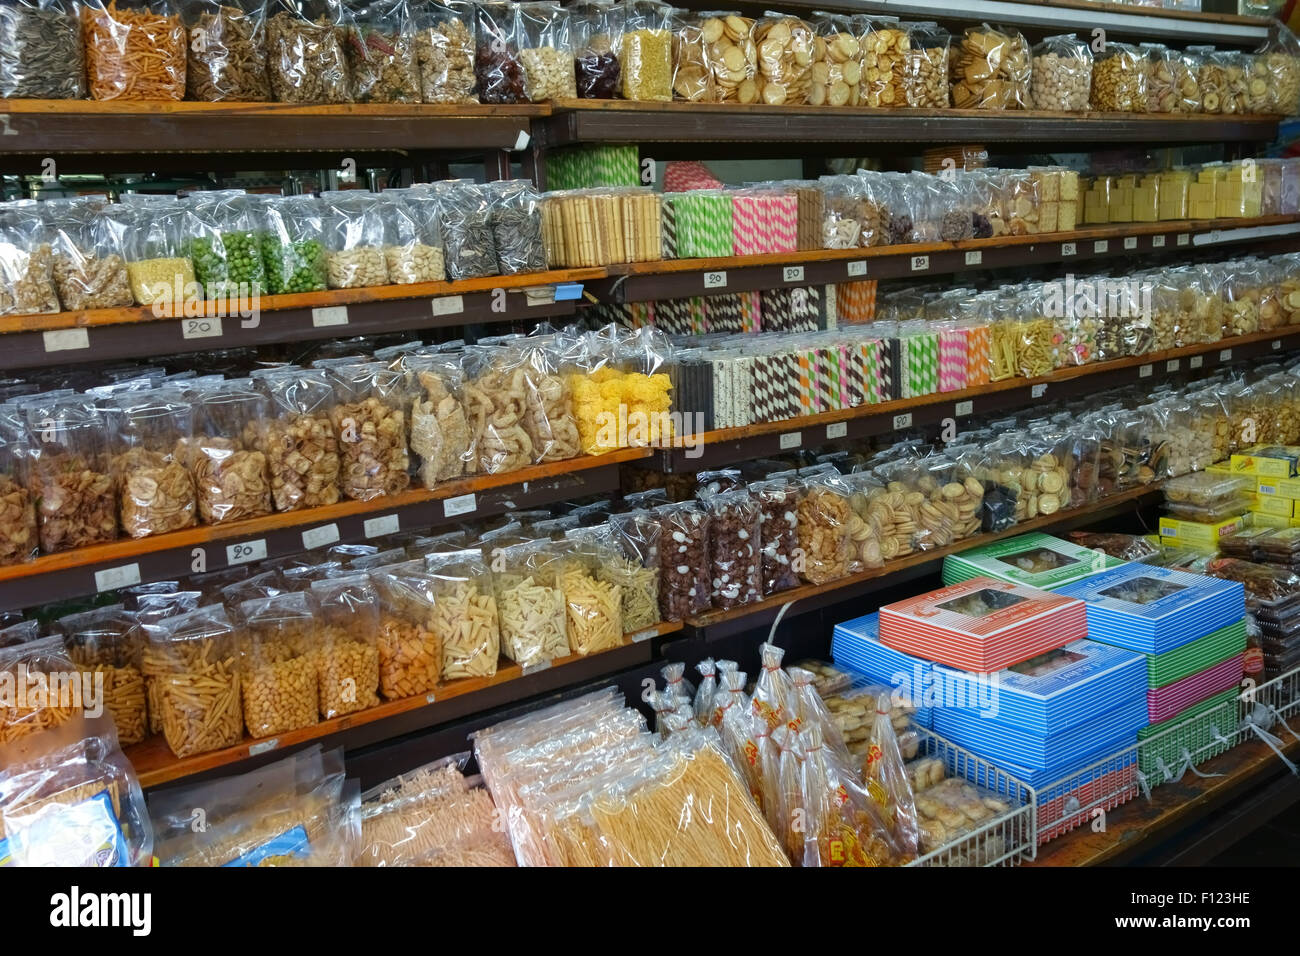 A variety of products in packets, boxes and jars in a stall in a Bangkok food market, Thailand Stock Photo